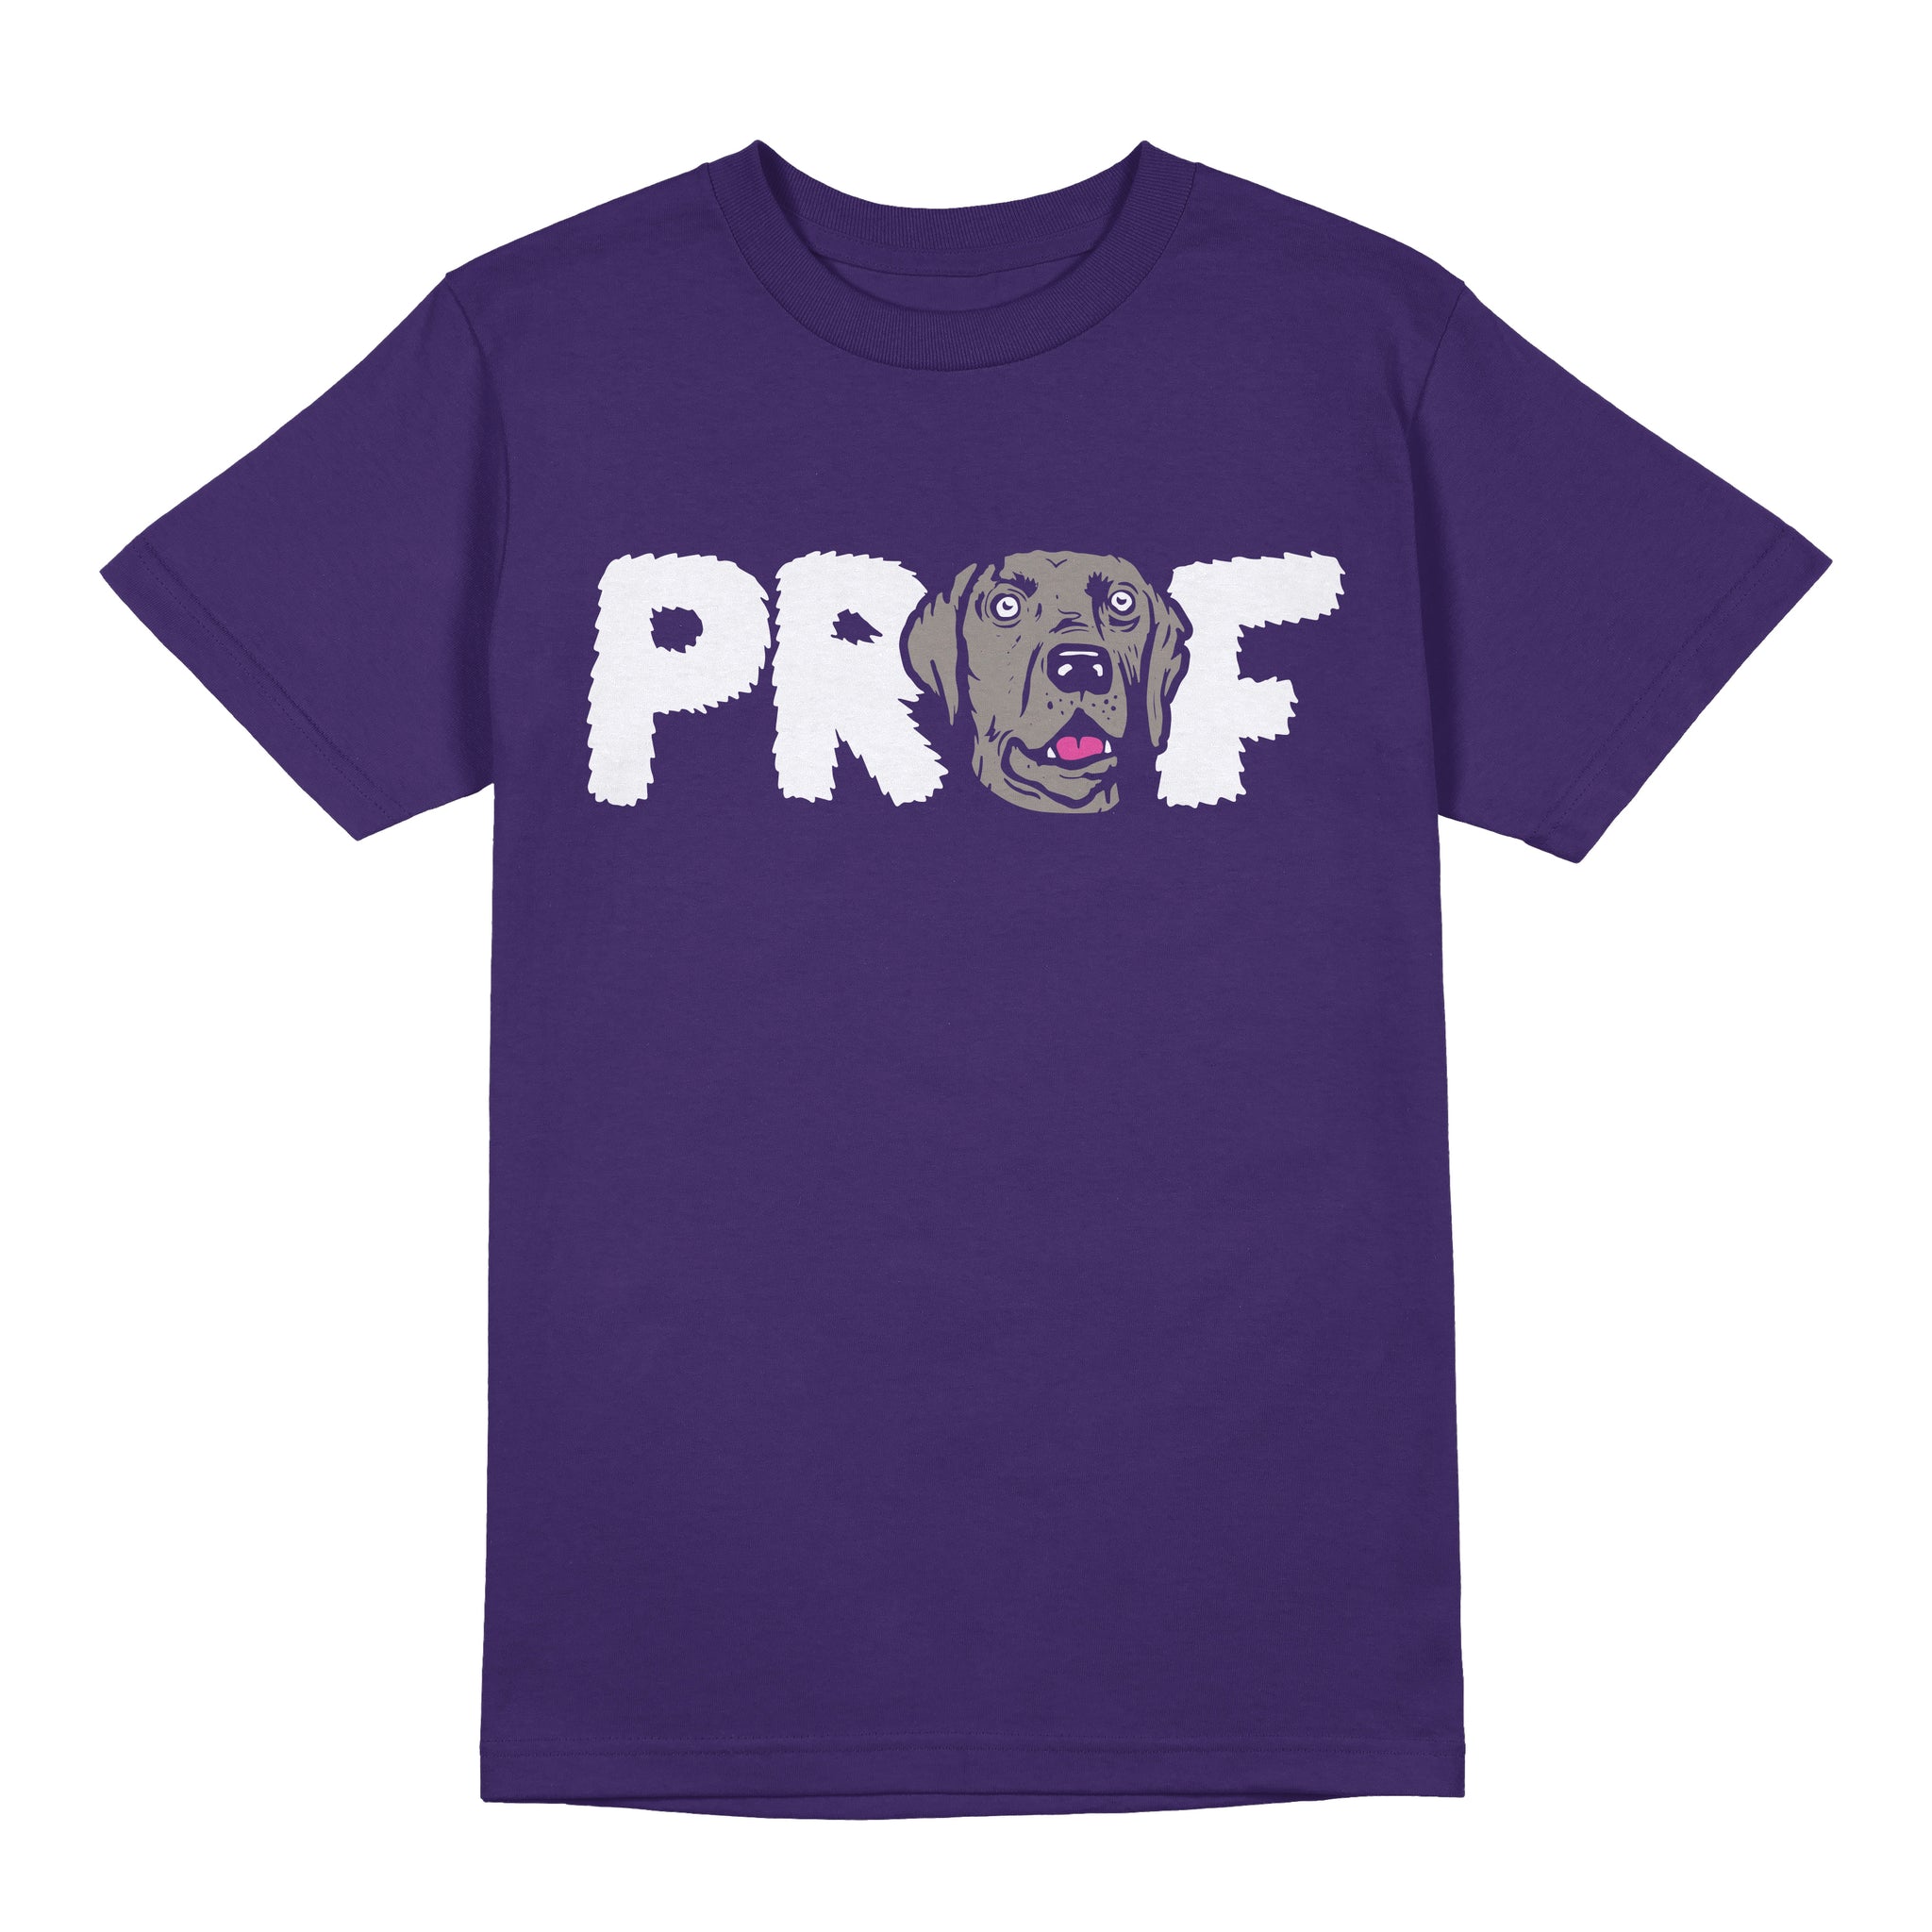 PROF "Feed the Dogs" Purple T-Shirt